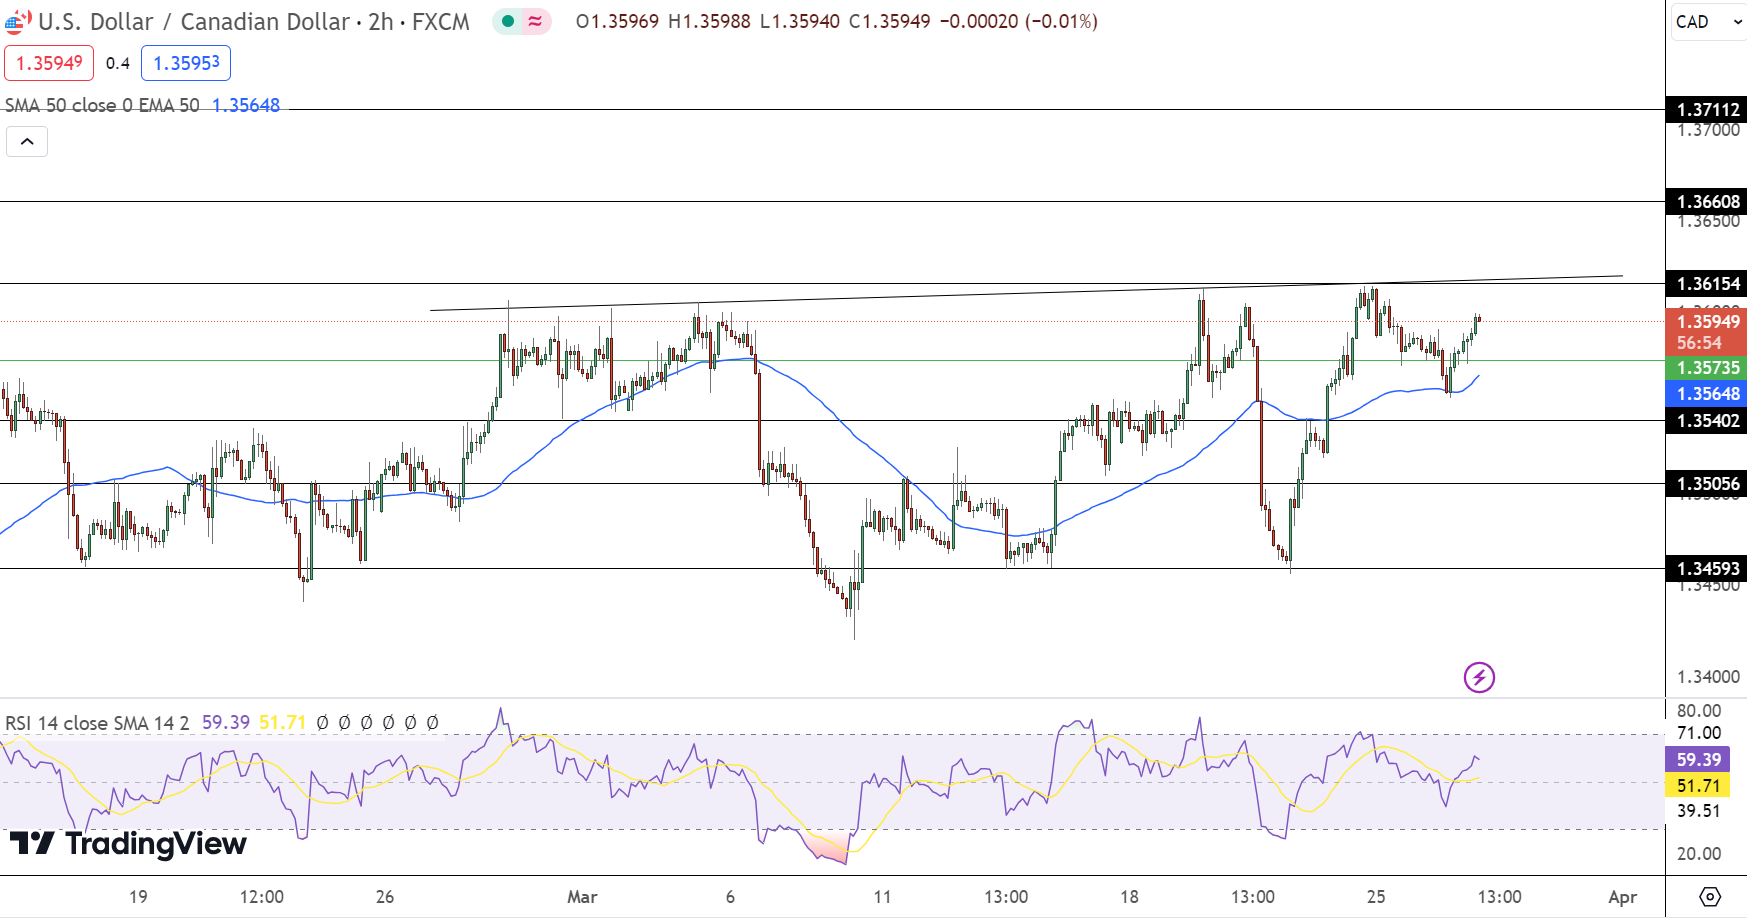 USD/CAD Price Forecast: Anticipating Fed's Policy Shift at 1.3595 – FX Leaders